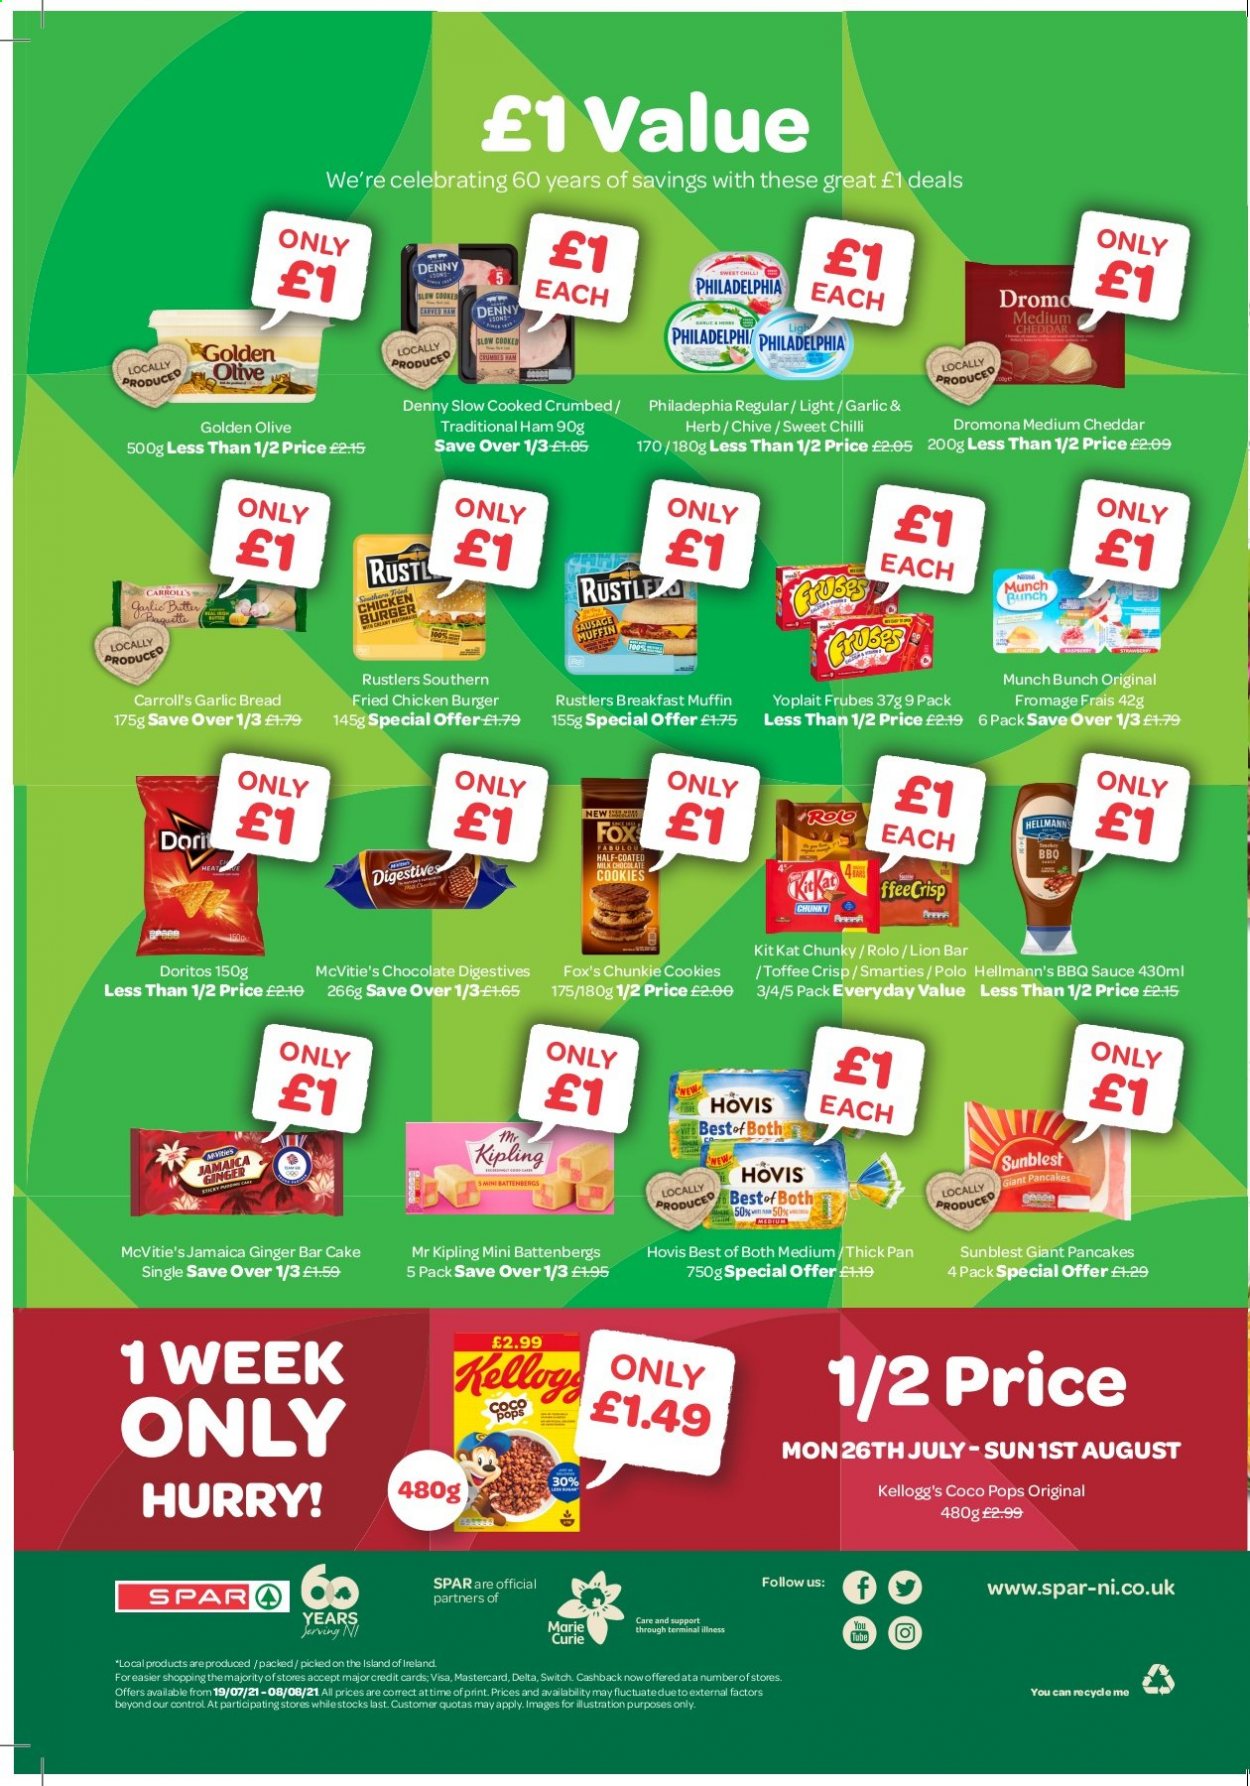 thumbnail - SPAR offer  - 19/07/2021 - 08/08/2021 - Sales products - ginger, hamburger, bread, cake, muffin, sauce, fried chicken, pancakes, ham, sausage, Philadelphia, cheddar, Yoplait, milk, Hellmann’s, cookies, chocolate, Smarties, KitKat, toffee, Kellogg's, Doritos, coco pops, BBQ sauce, punch, pan. Page 4.